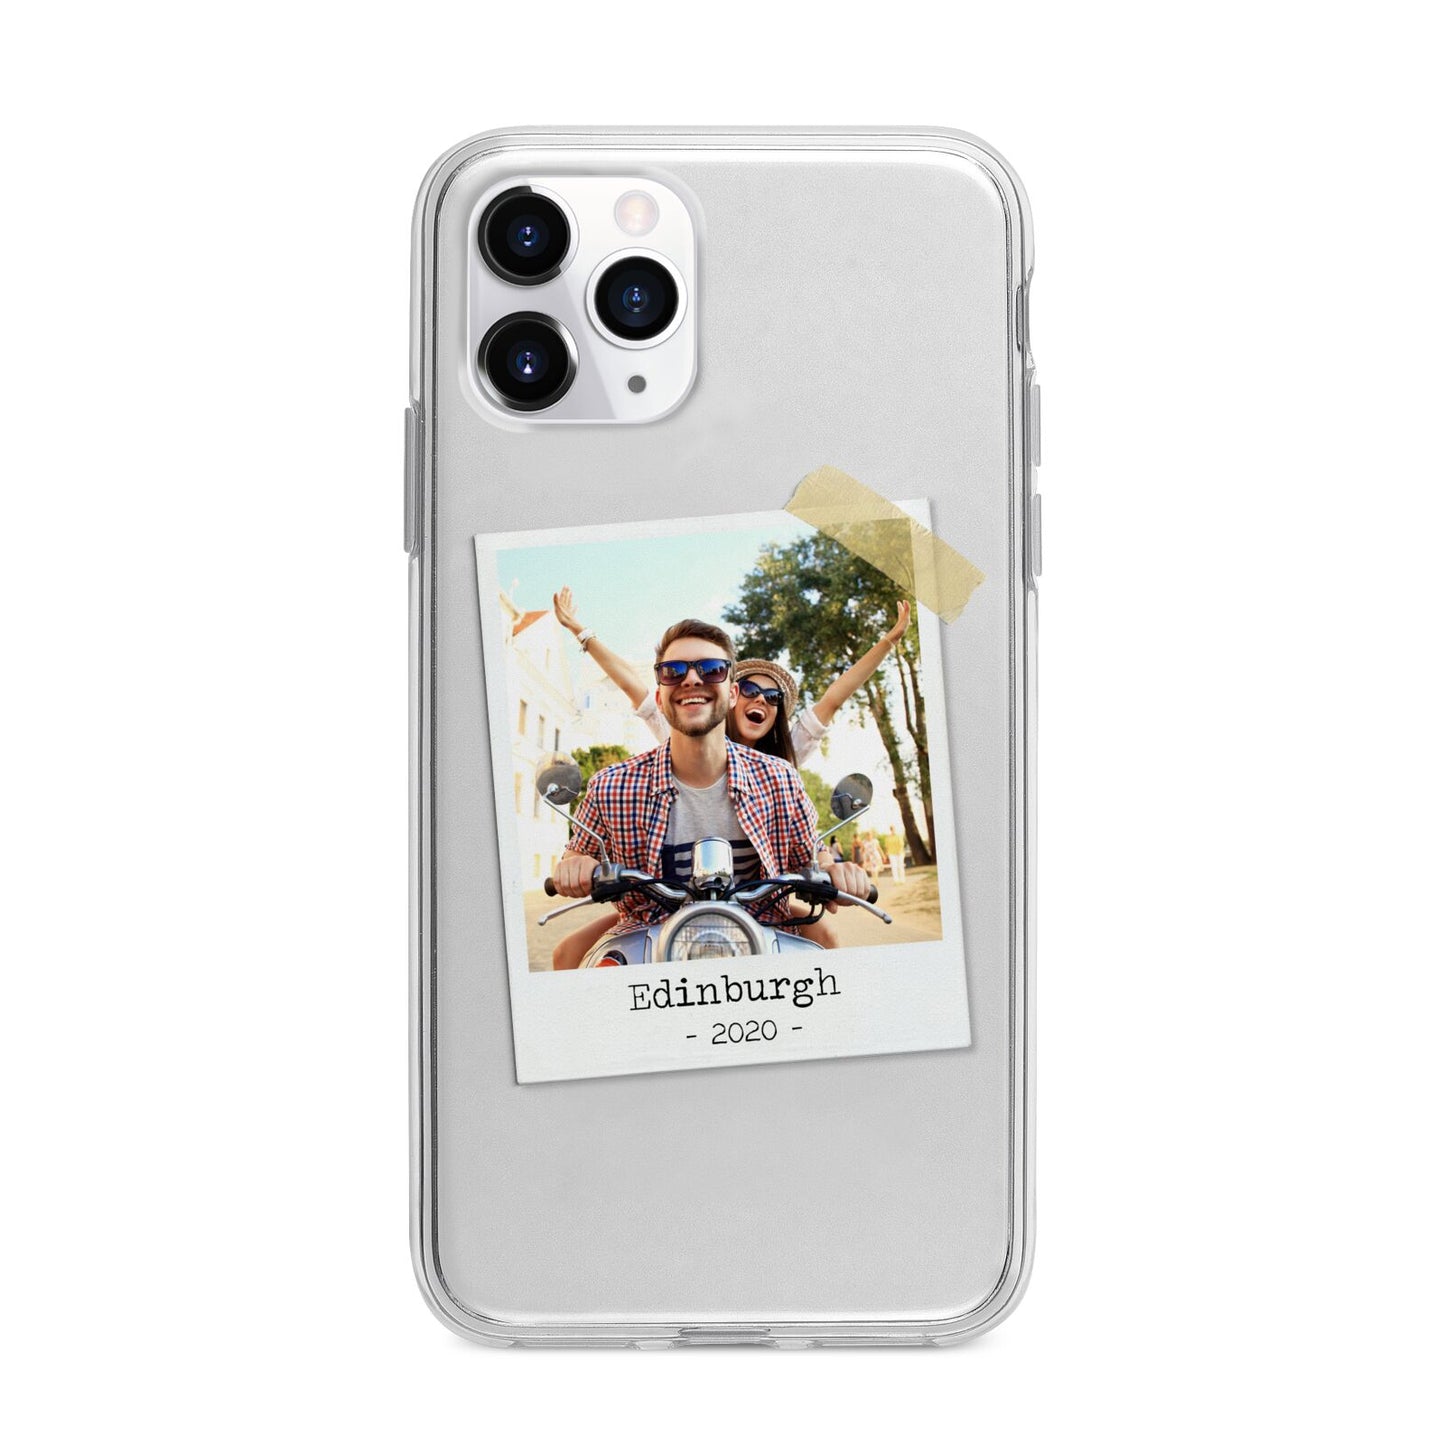 Taped Holiday Snap Photo Upload Apple iPhone 11 Pro in Silver with Bumper Case